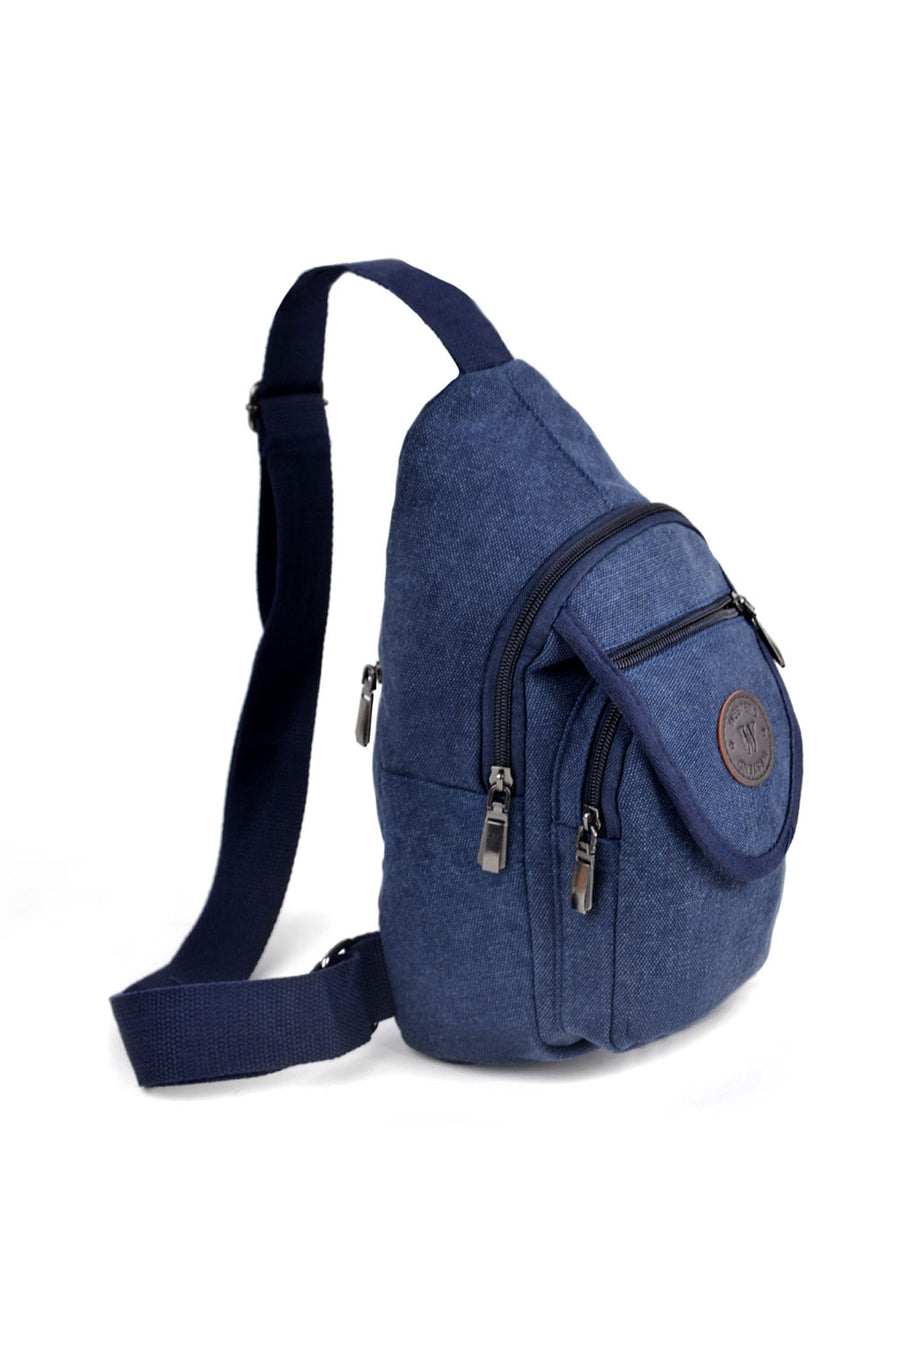 Canvas Sling Bag With Adjustable Strap - Vacay Land 